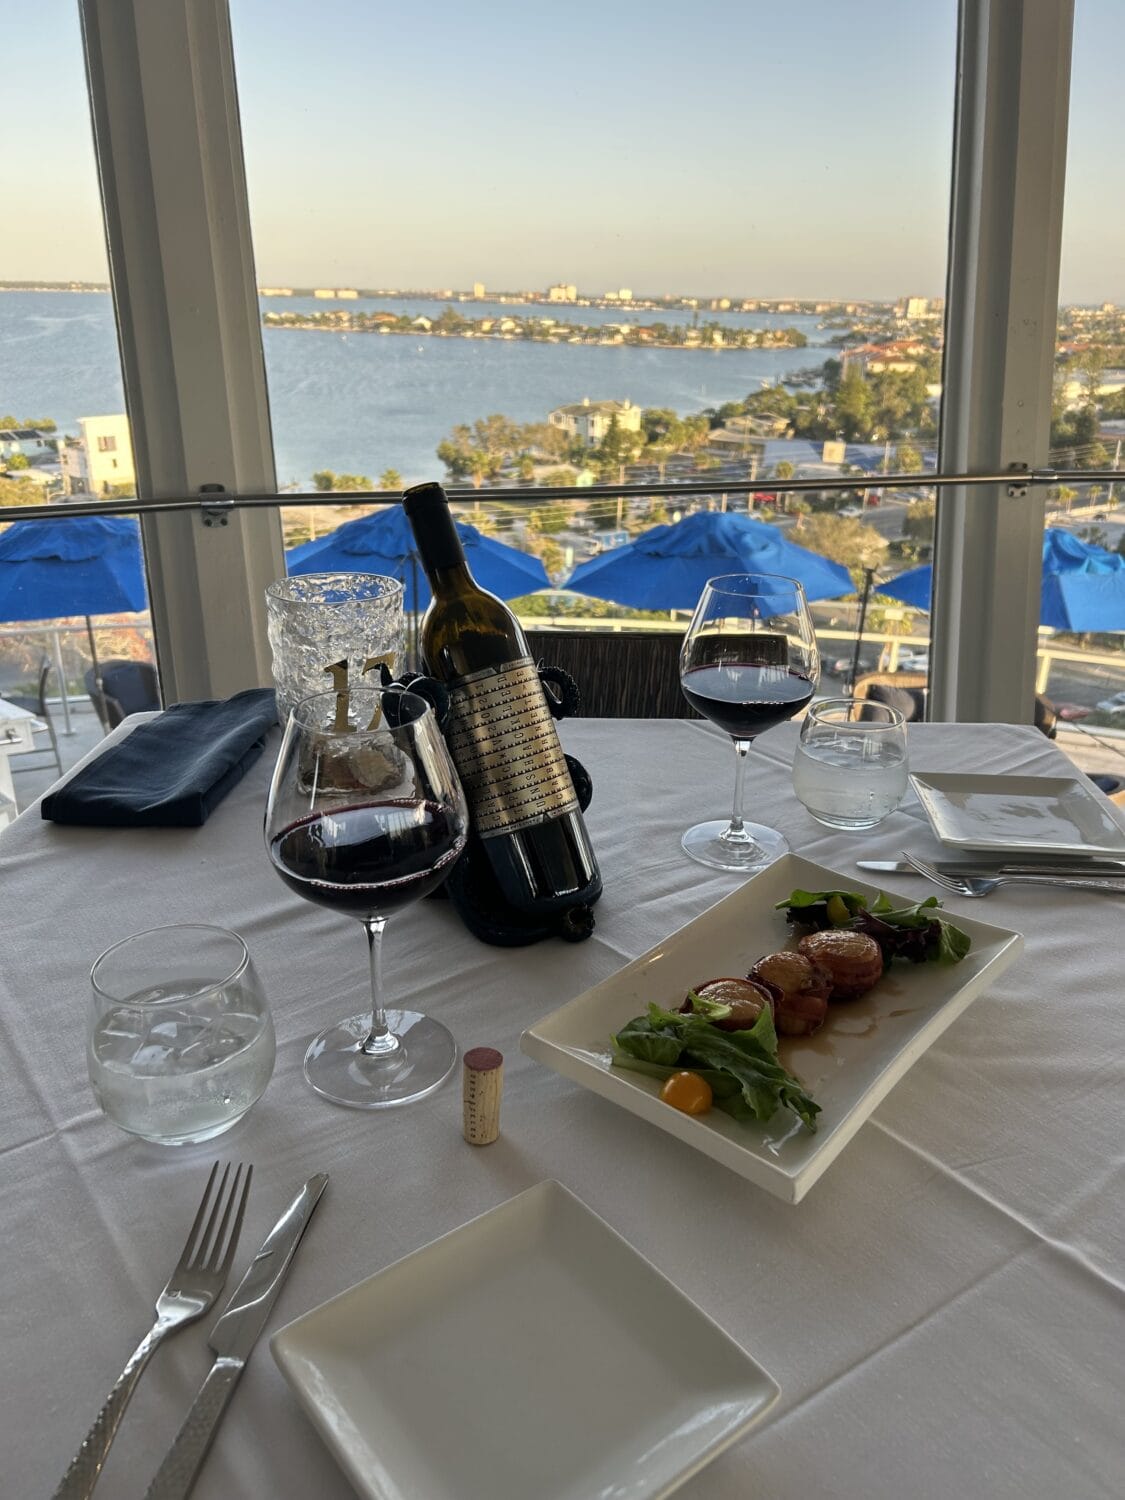 A unique dining experience with a view.